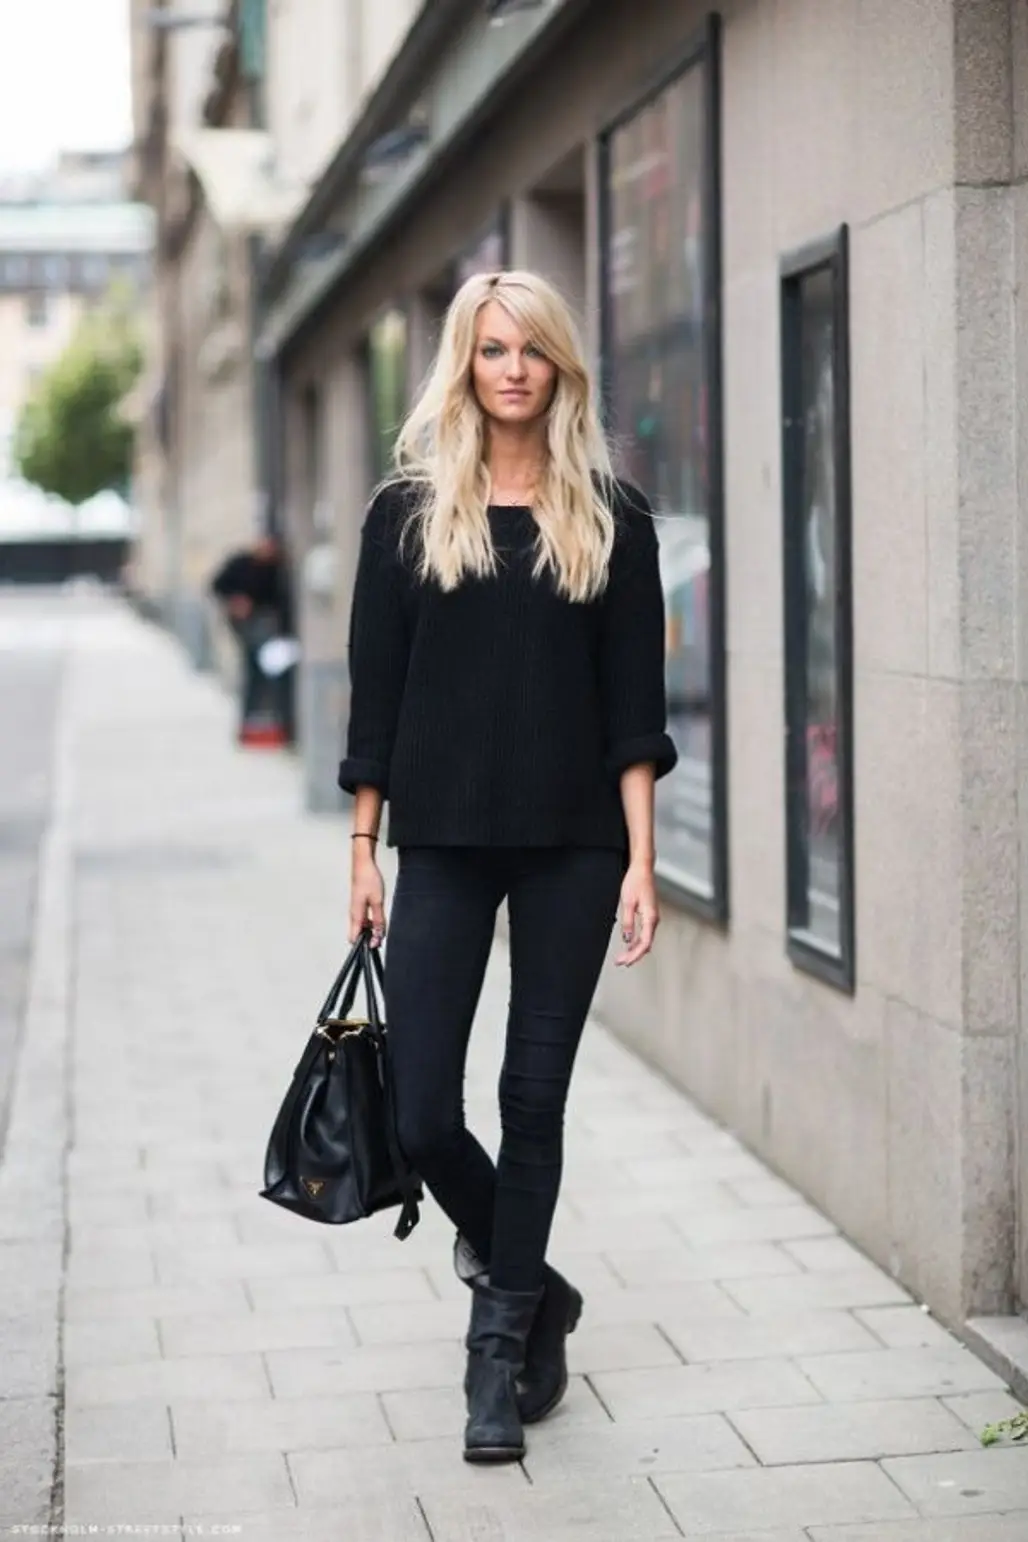 7 Street Style Ways to Look Cozy and Chic This Winter